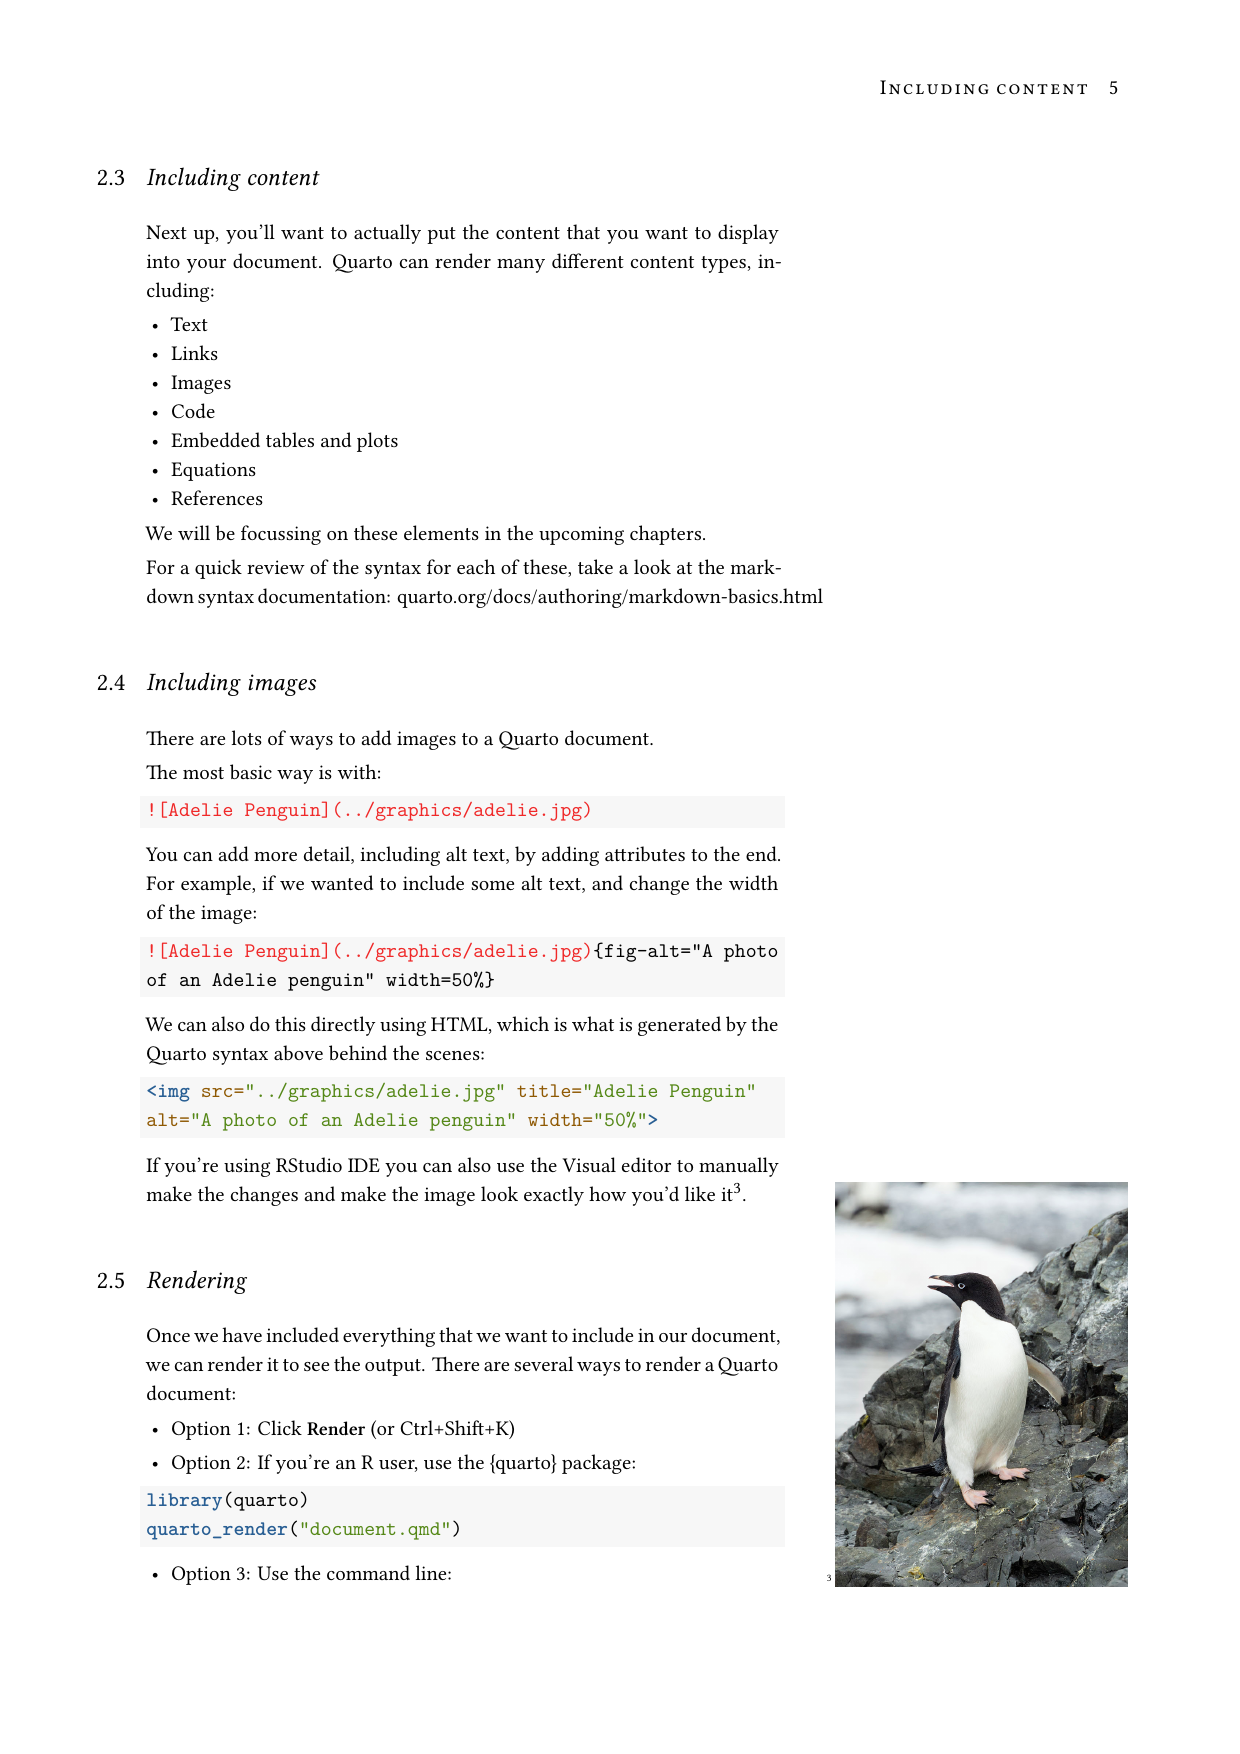 Page 5 of example course material for  Reporting with Quarto